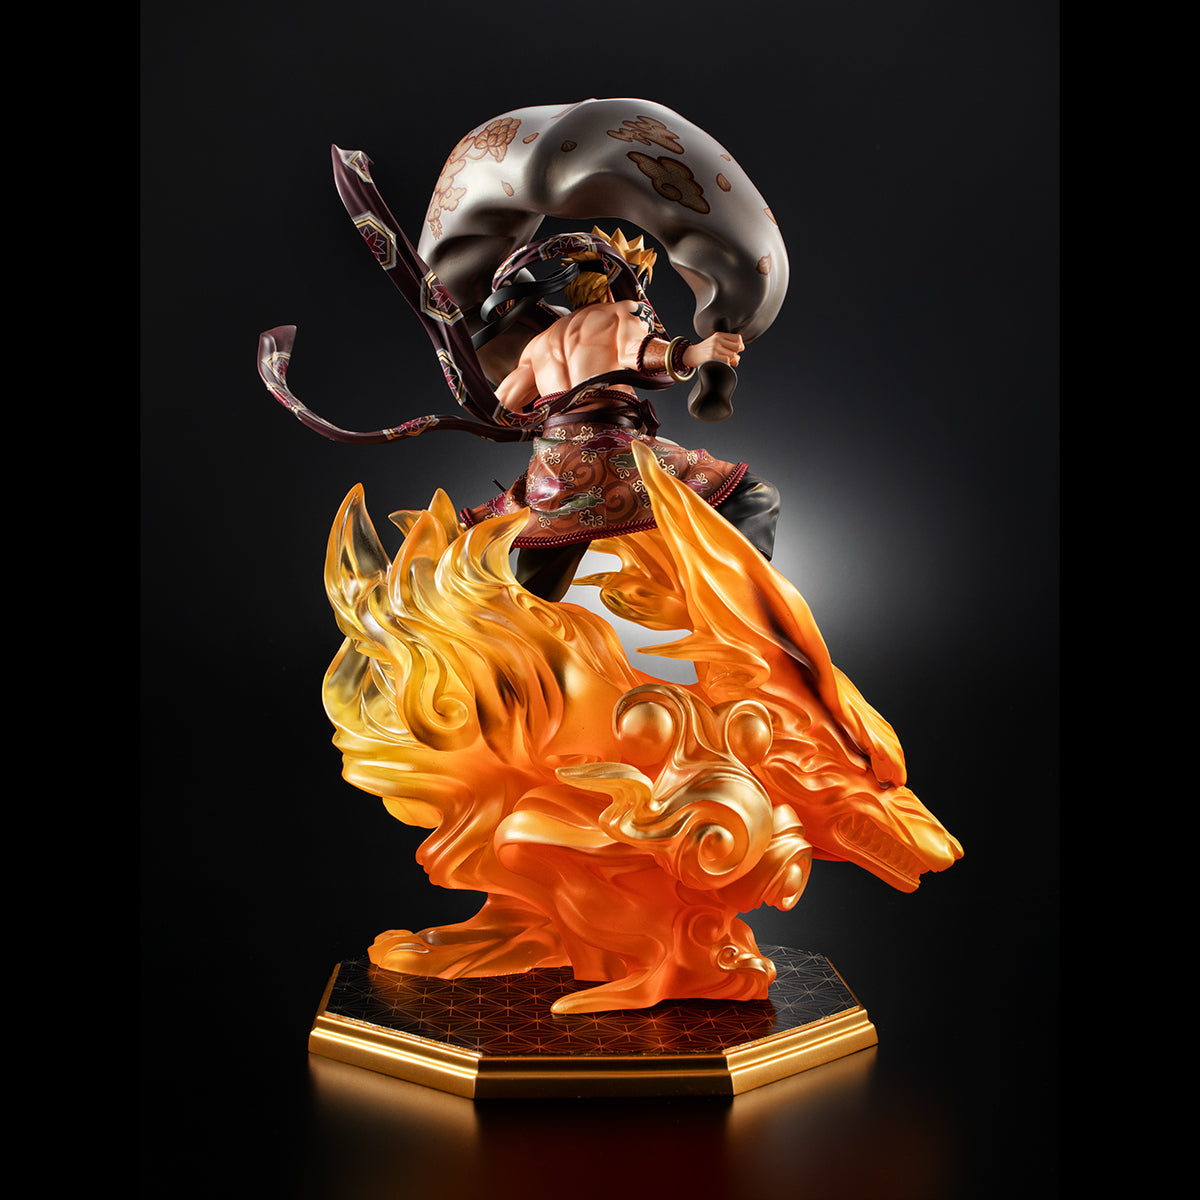 Naruto "Wind God" GEM Statue by Megahouse